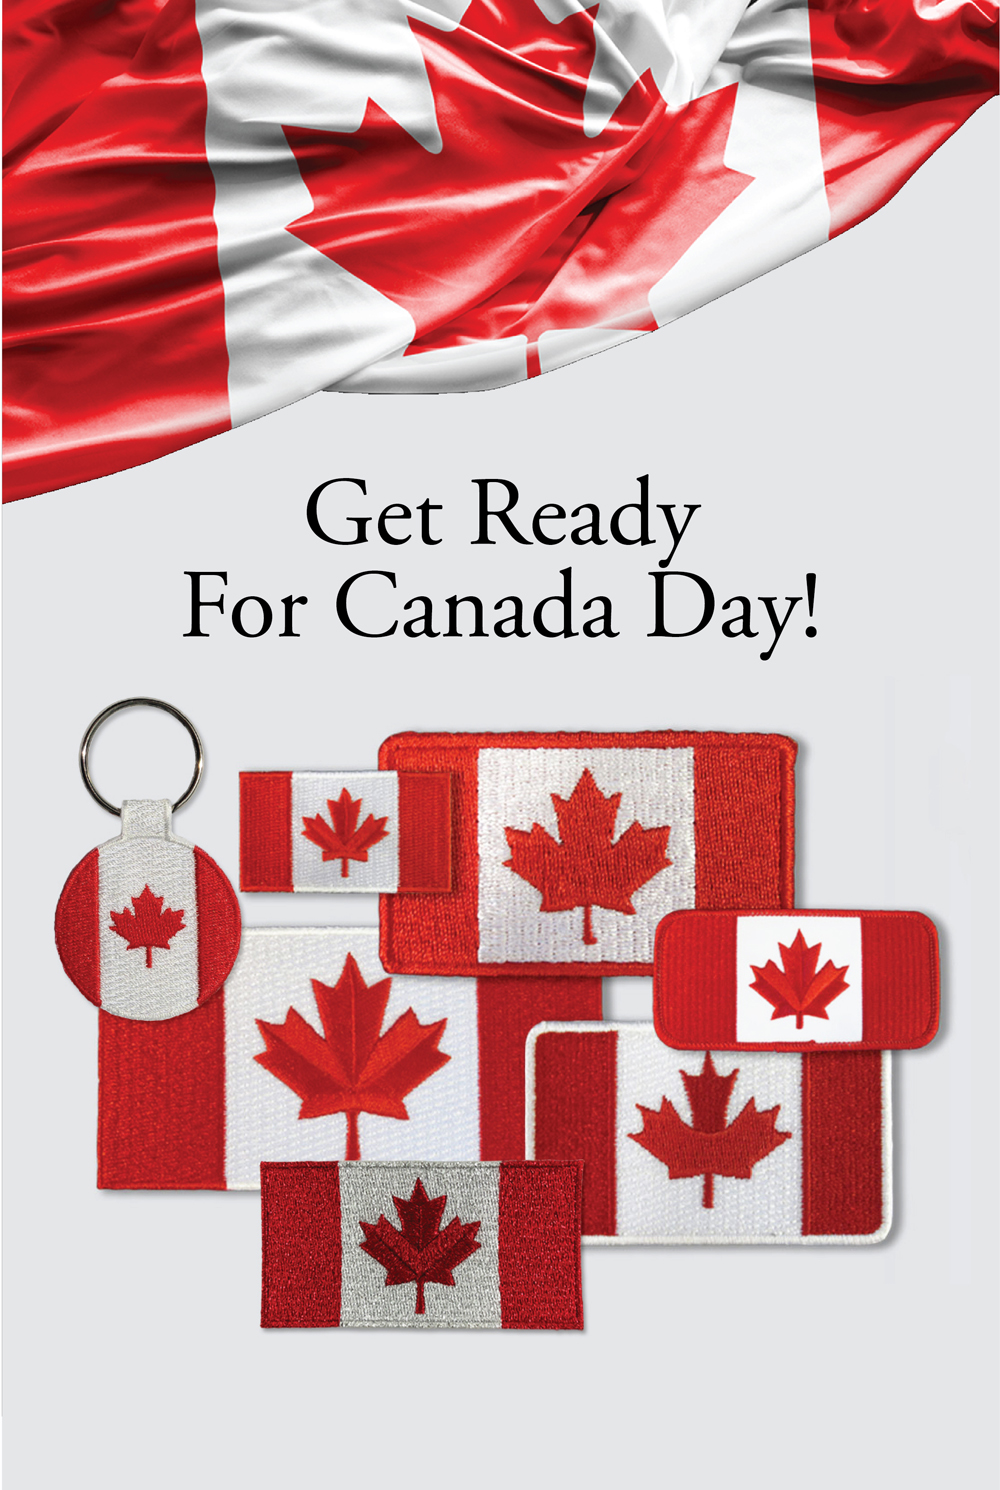 Get Ready For Canada Day!